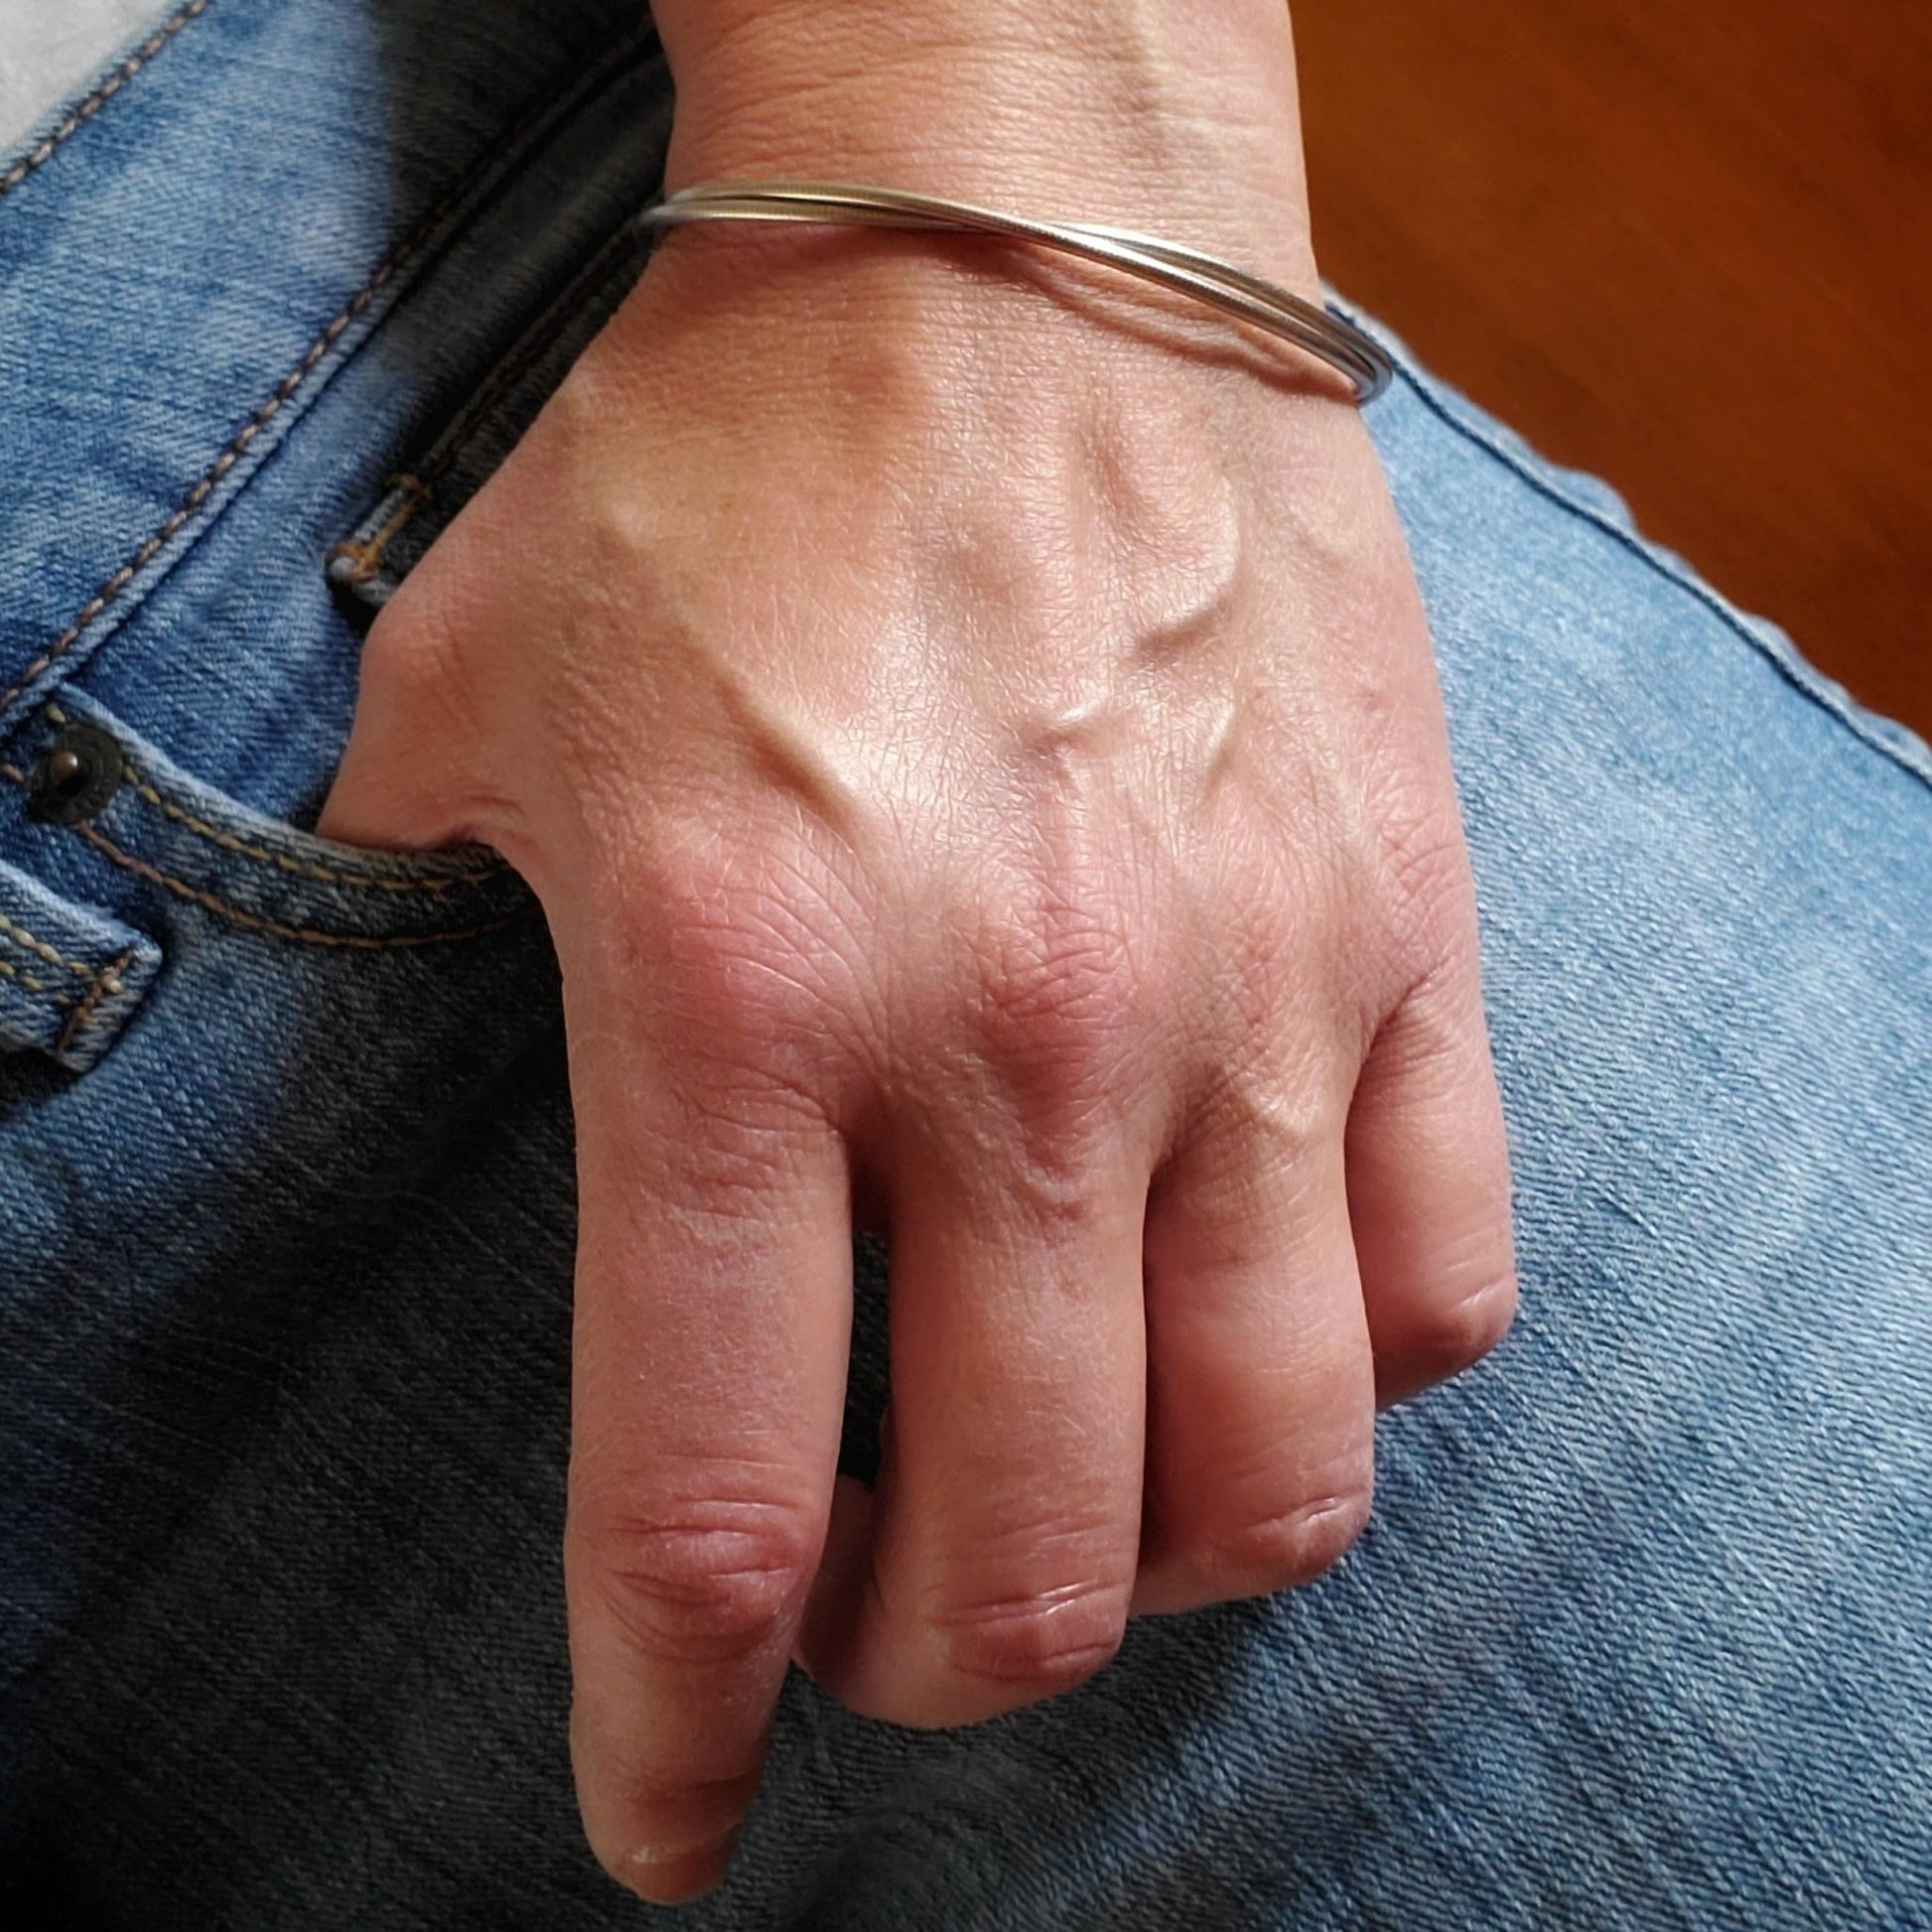 woman's hand the thumb is hook onto a jean pocket on her wrist there is a silver coloured clasp style bracelet made from upcycled upright bass strings